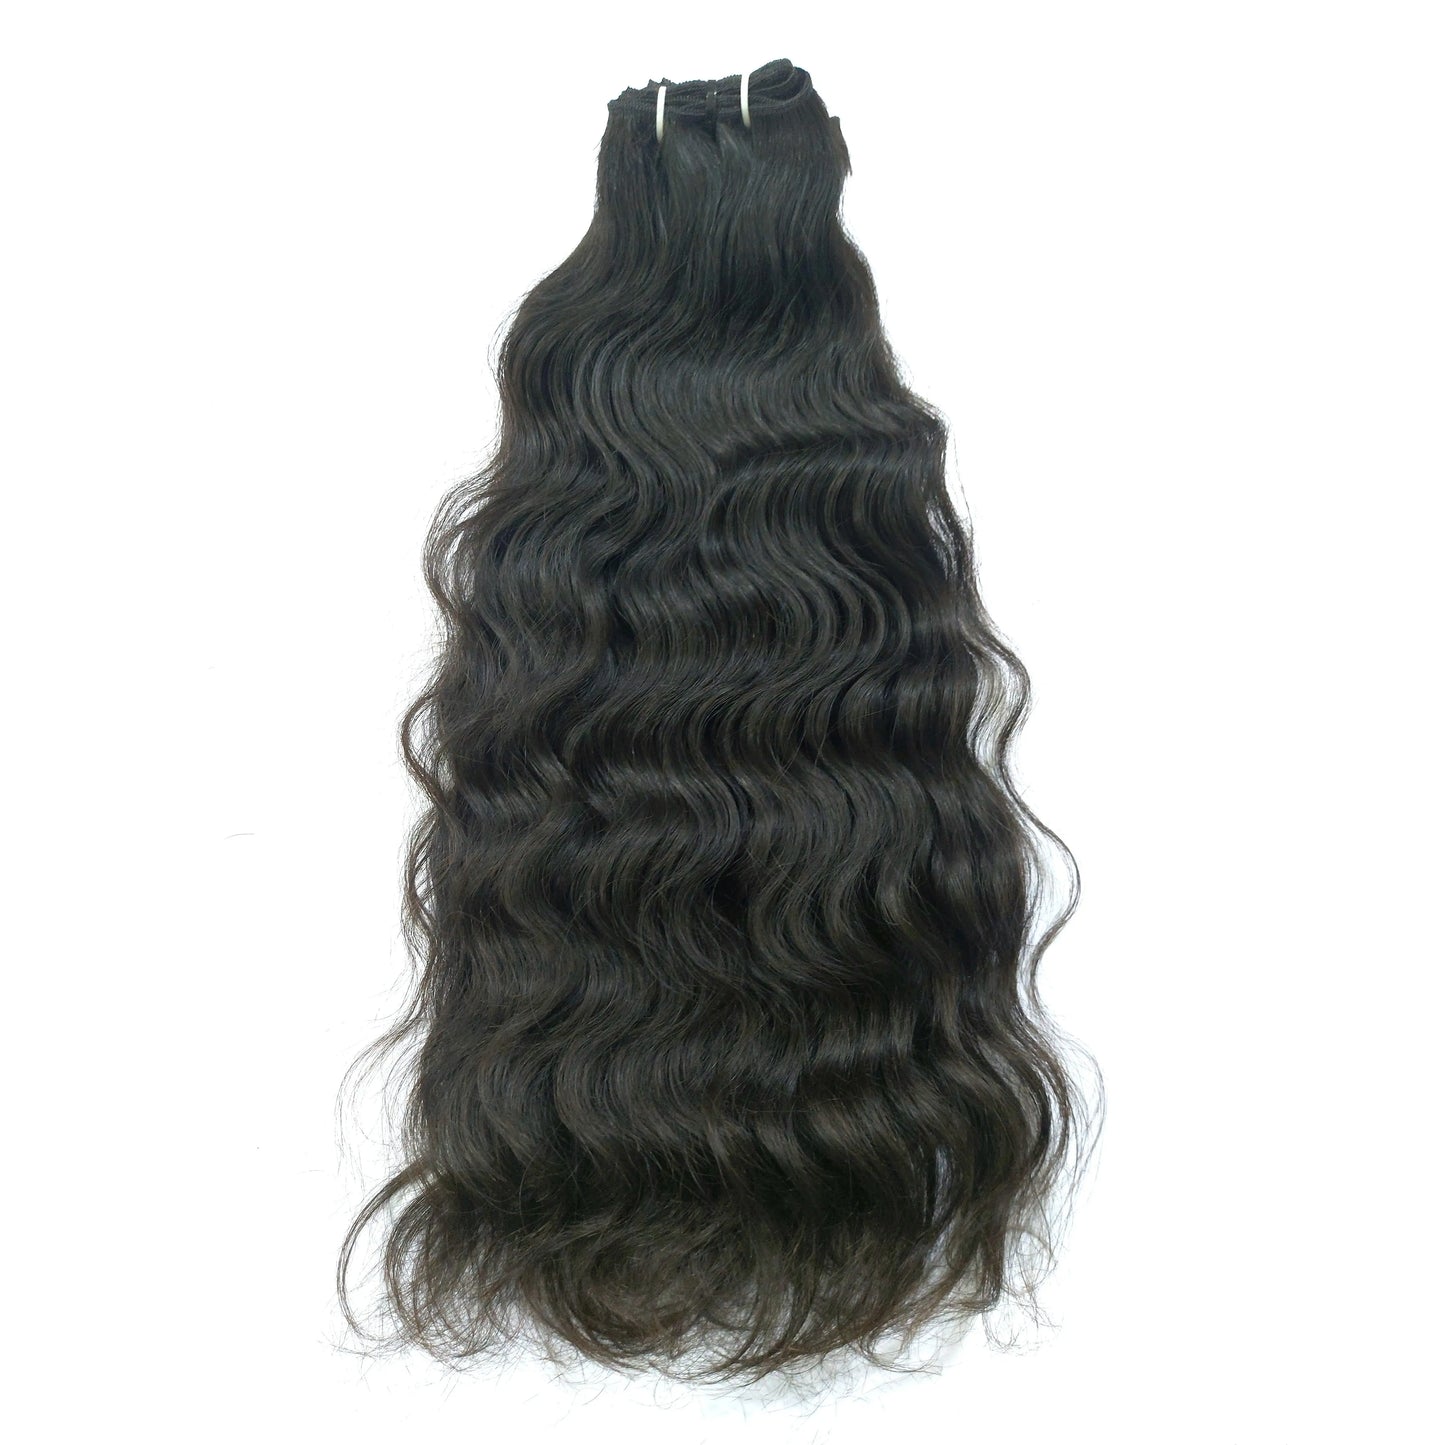 100% high-quality Natural Wavy Remy Human Hair Extensions - Image #5